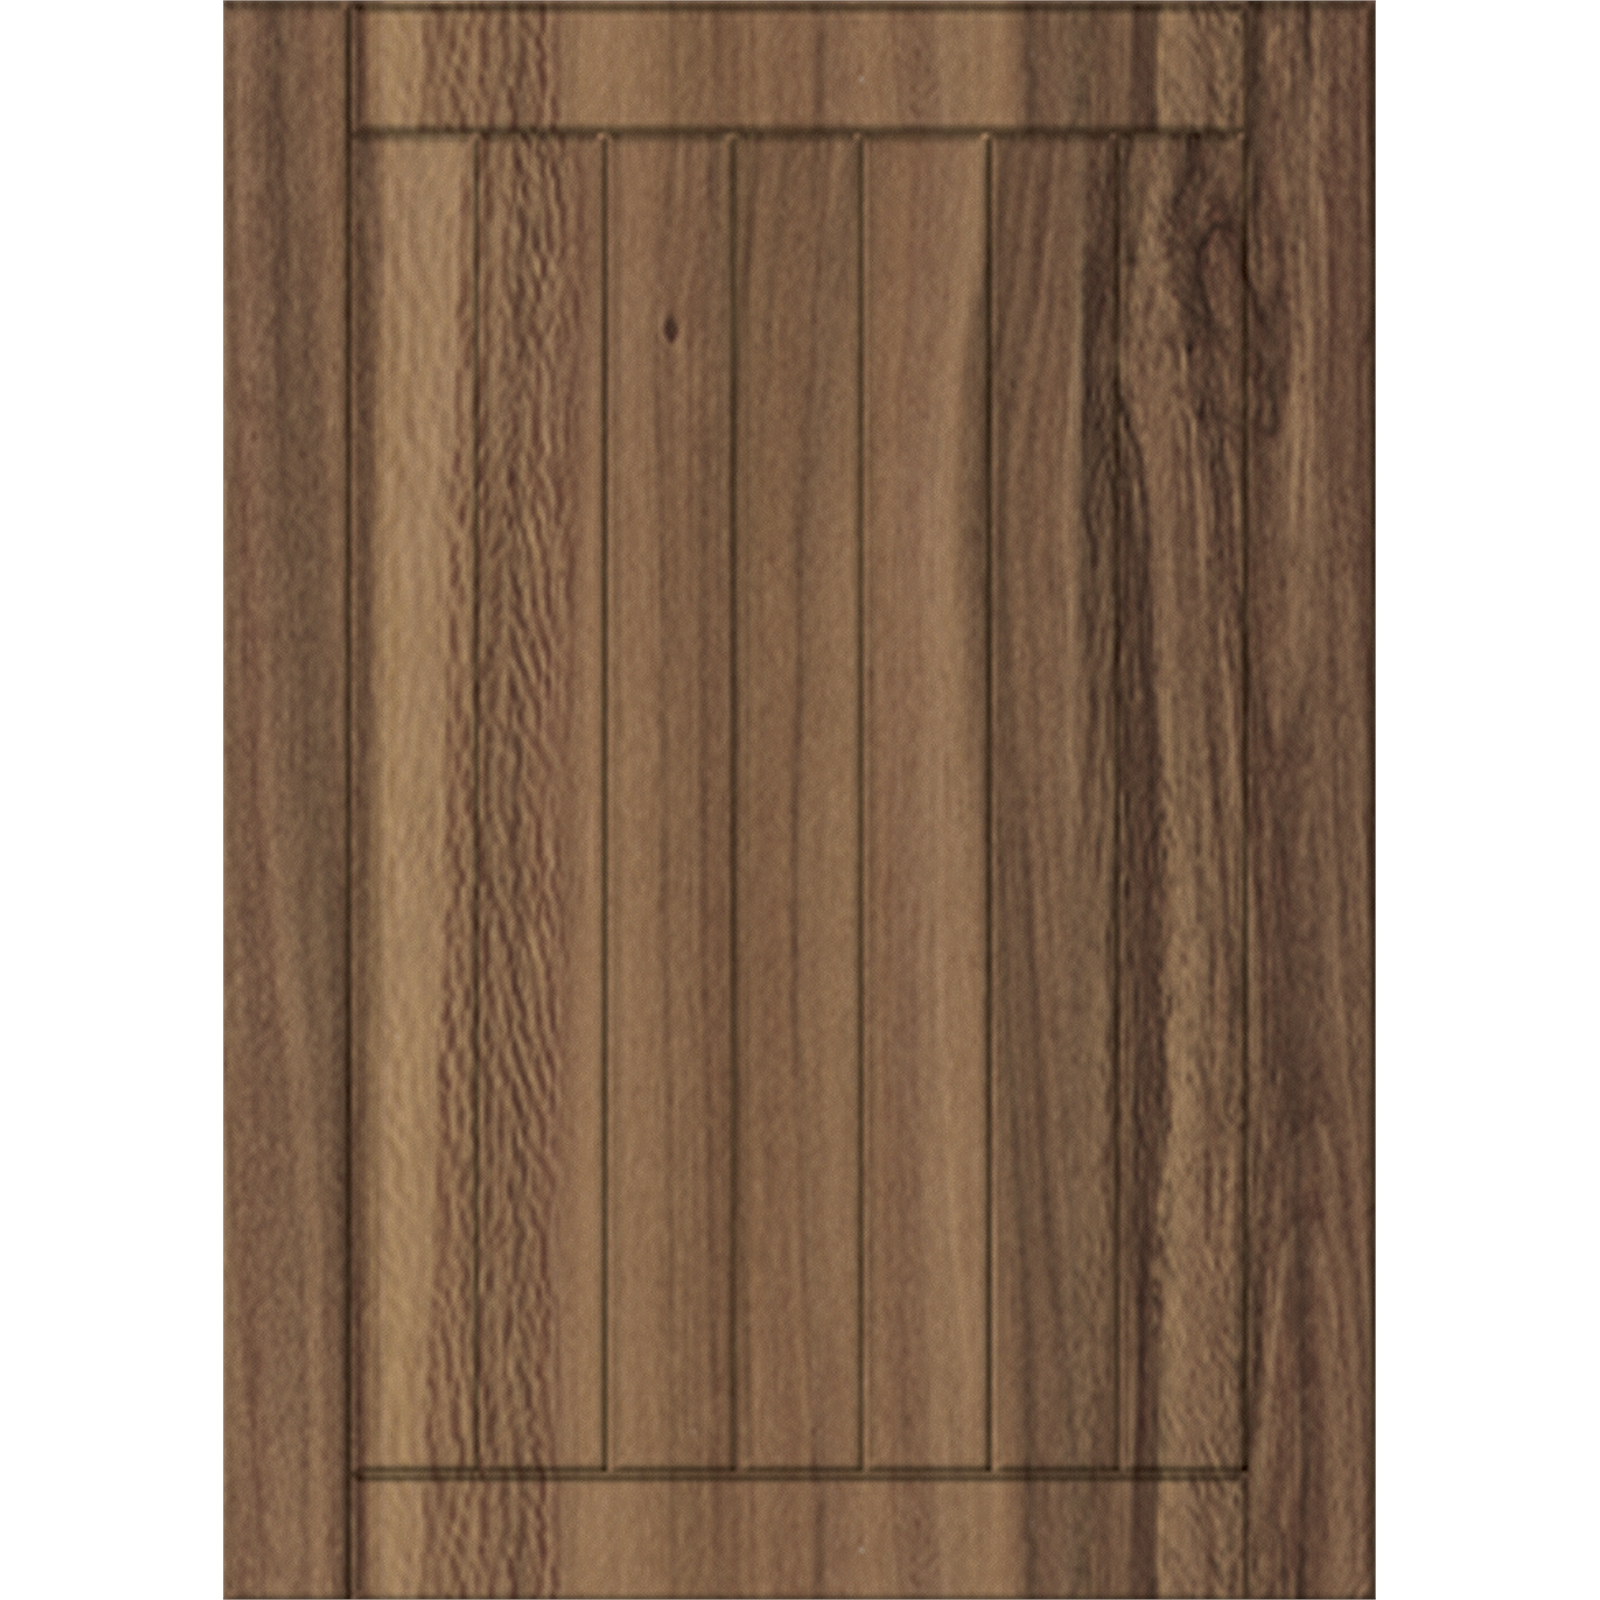 Kaboodle 900mm Outback Country Slimline Door